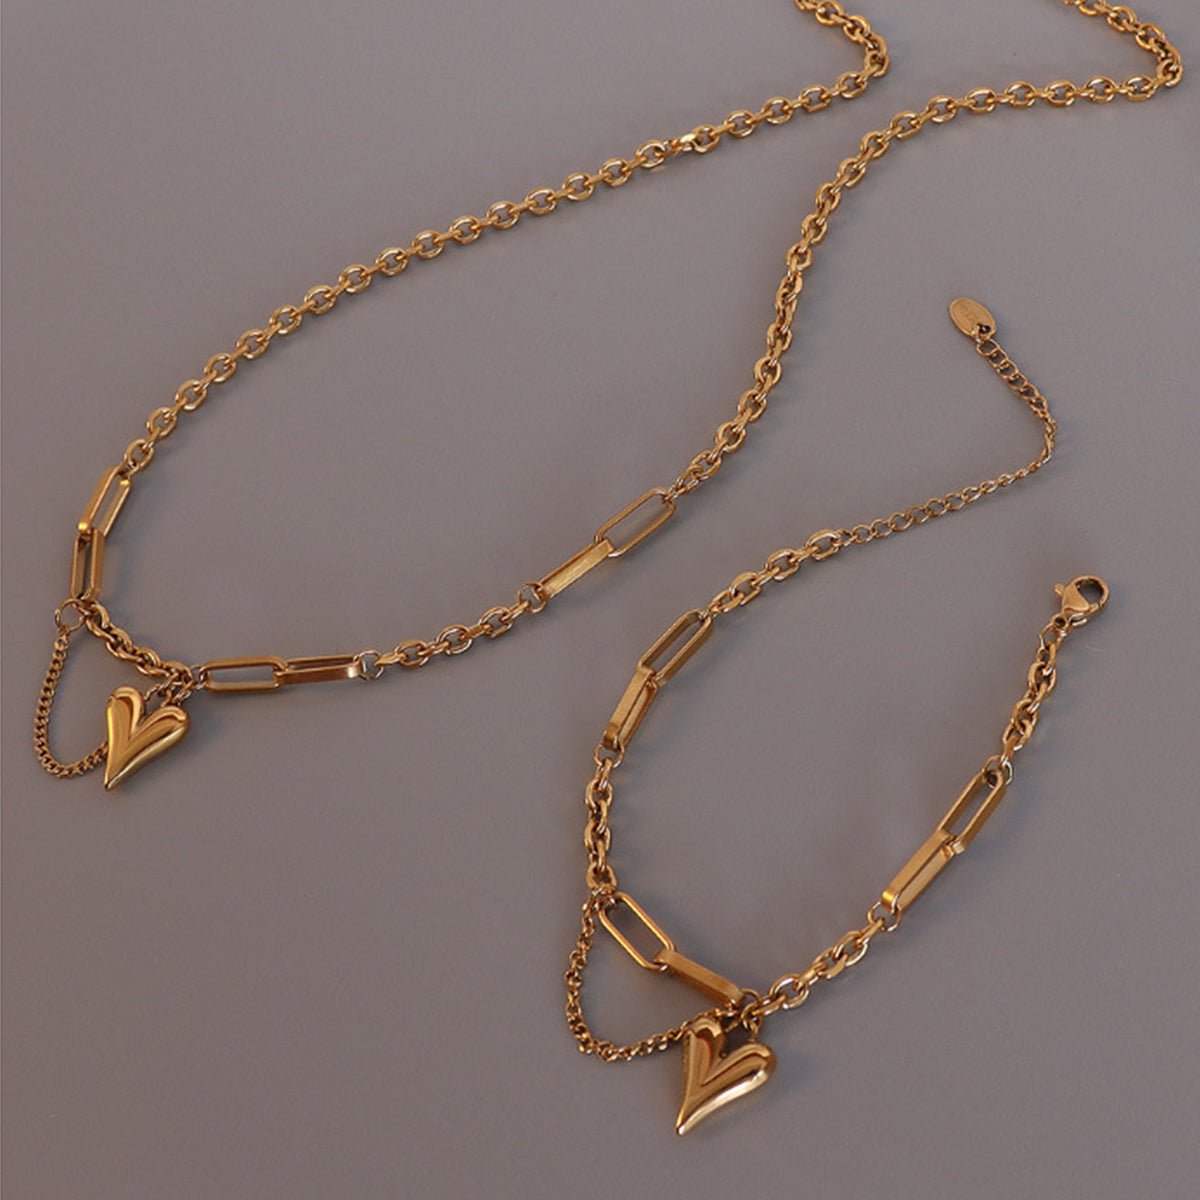 Heart Necklace Gold Pendant 18k Chain #Firefly Lane Boutique1